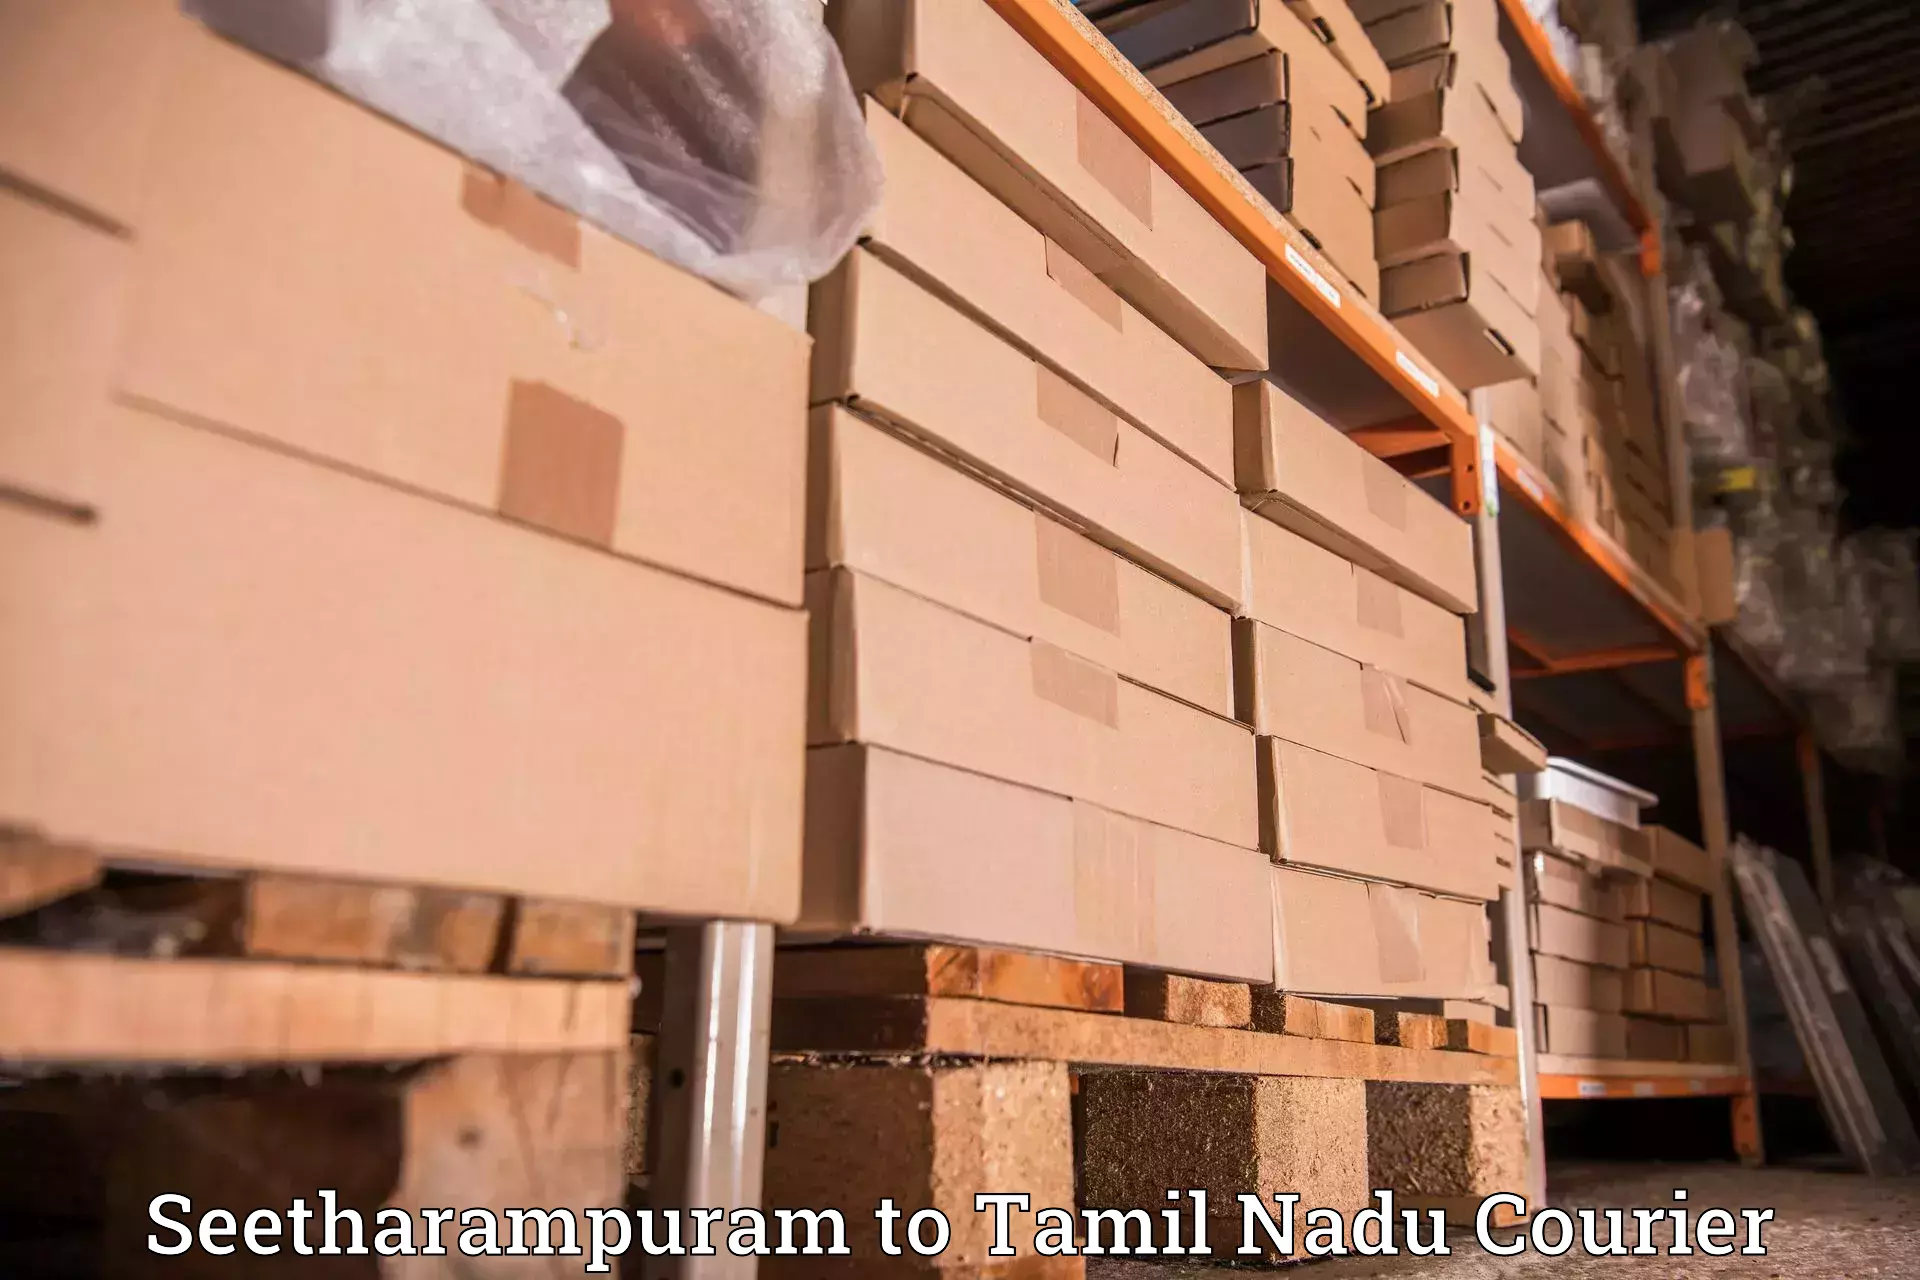 Global courier networks Seetharampuram to Turaiyur